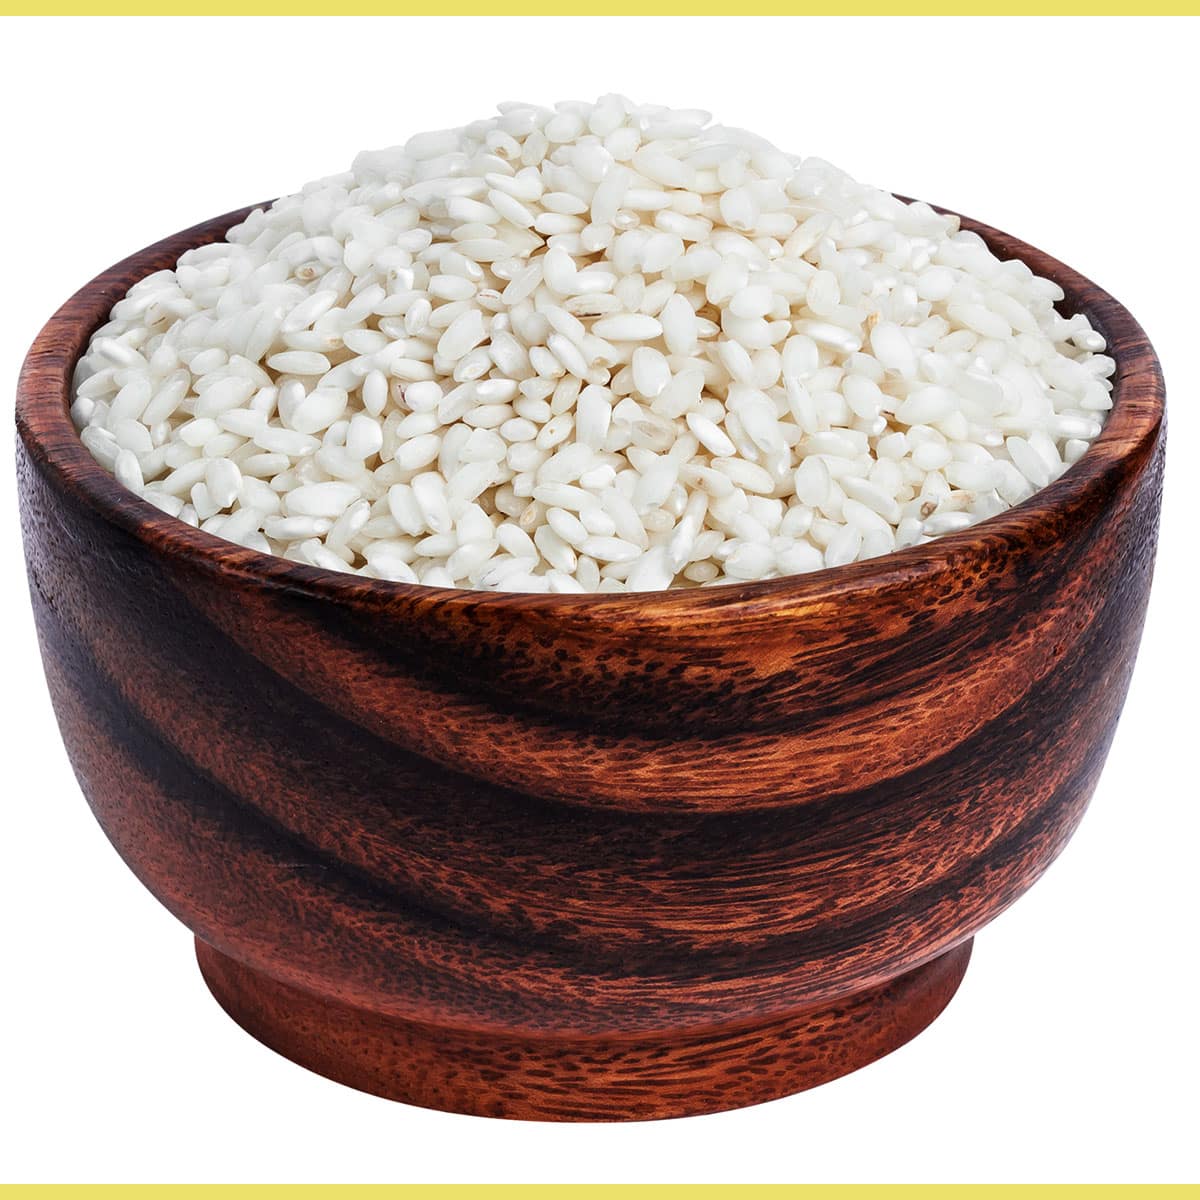 Short-grain white rice, also known as “sushi” or “glutinous” rice, has shorter, plump, and stickier grains with a glossy sheen and higher starch content.